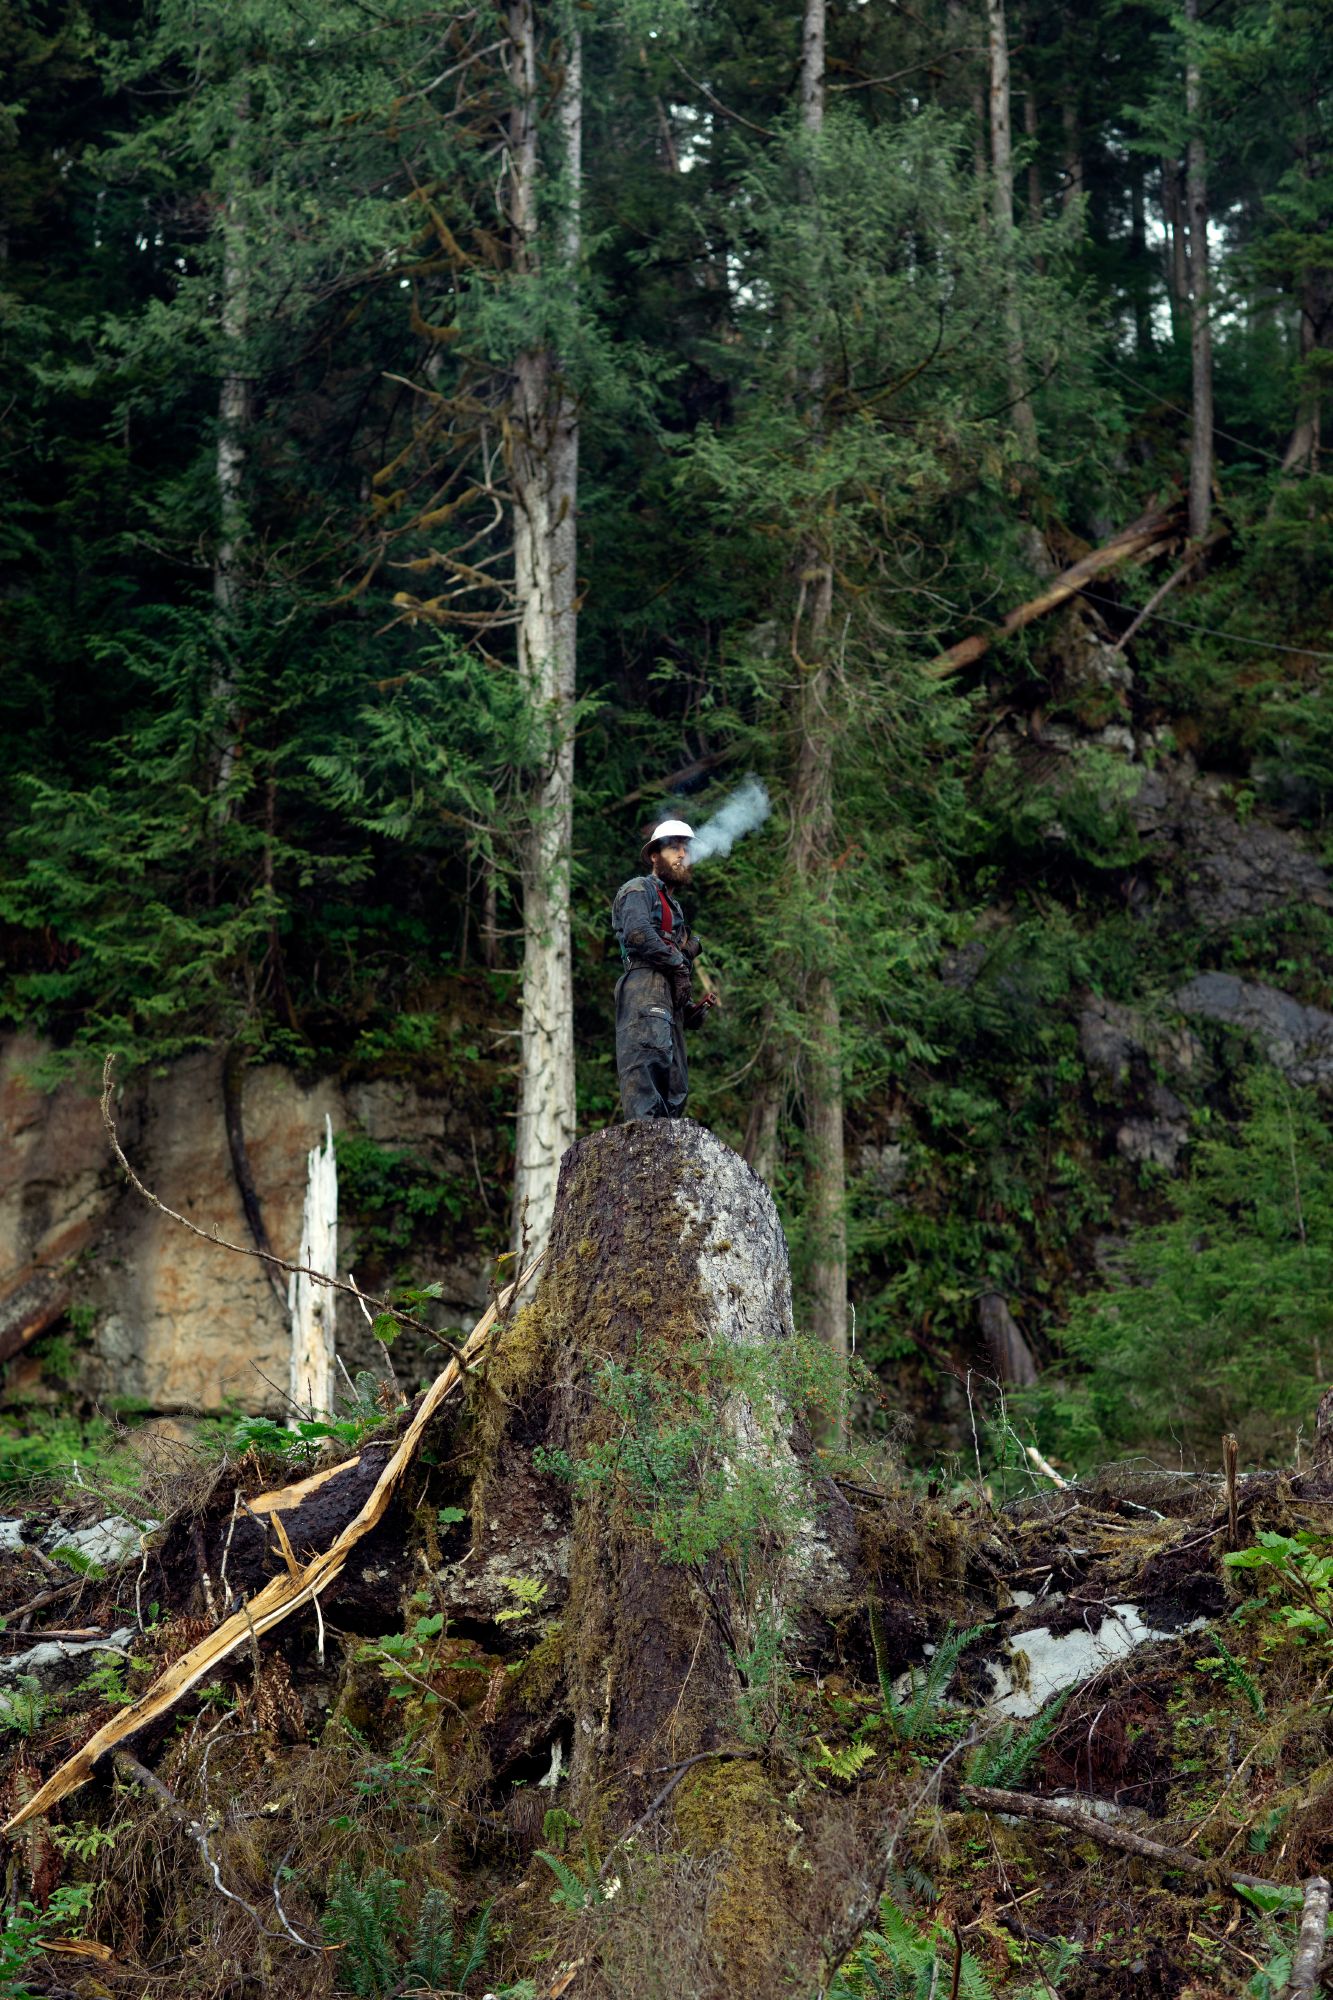 Drew Newman, wearing red suspenders, prepares at the Tuxekan logging site. Image by Joshua Cogan. United States, 2019.